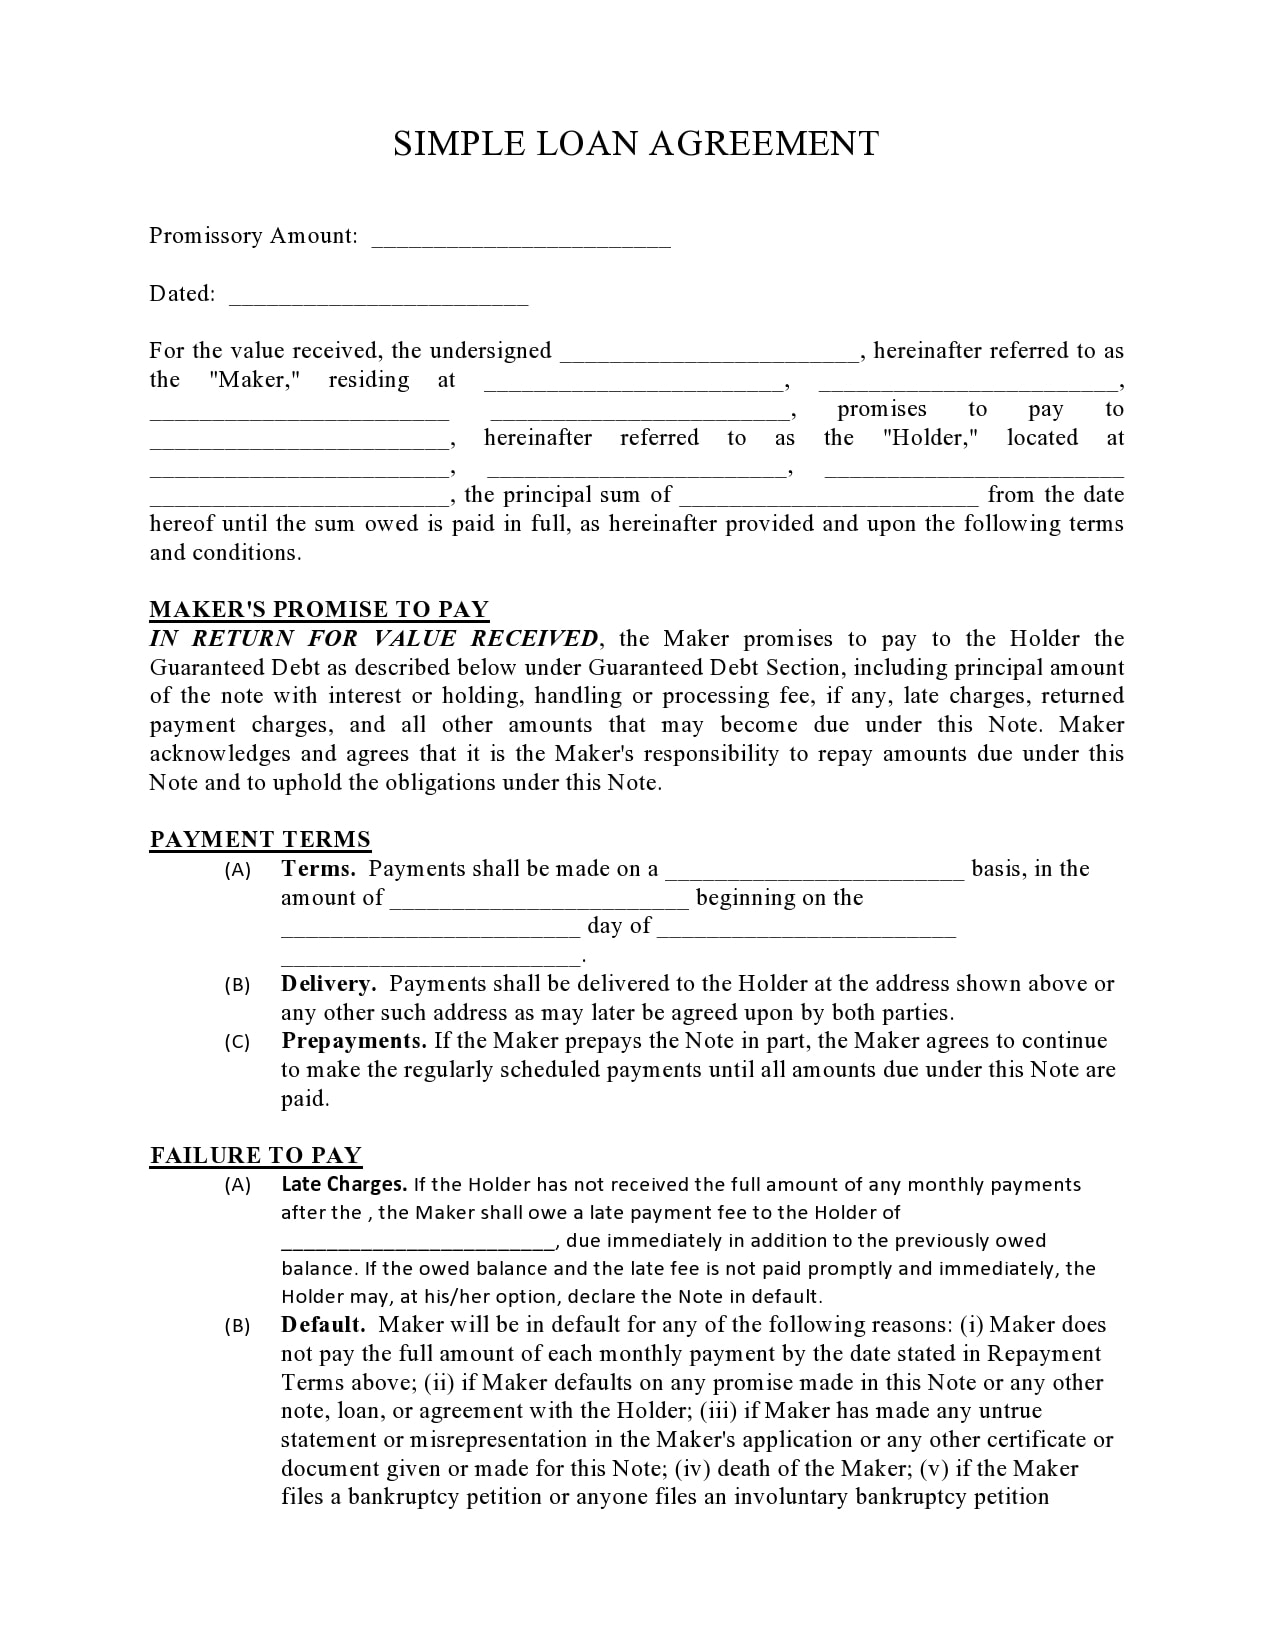 29 Simple Family Loan Agreement Templates (100% Free)